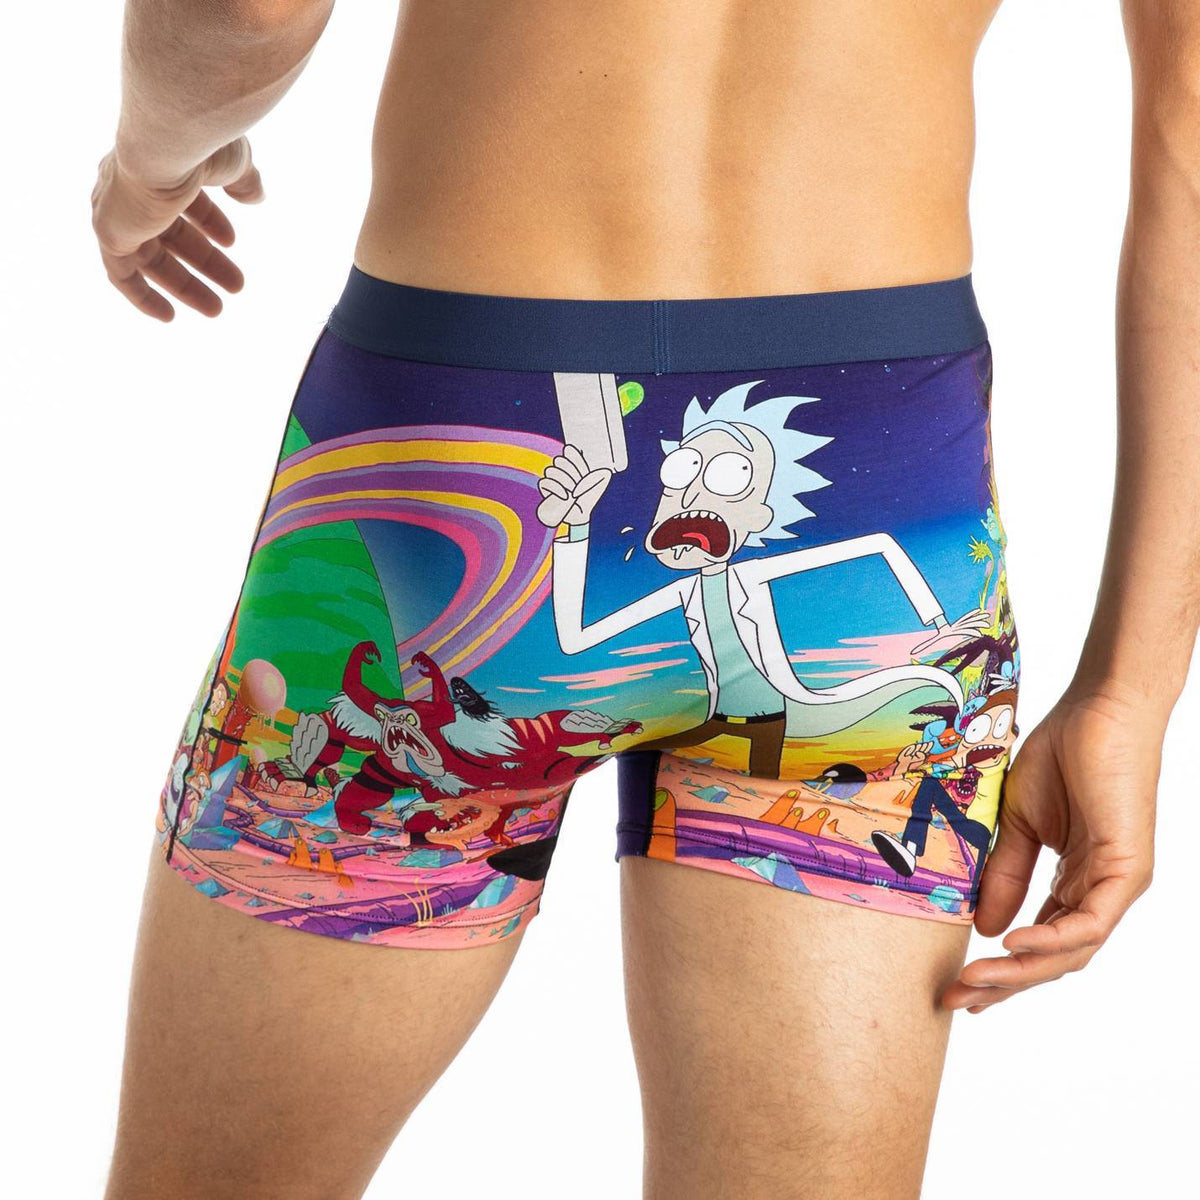 Target Shoppers Ditch Their Underwear for These Boxer Briefs